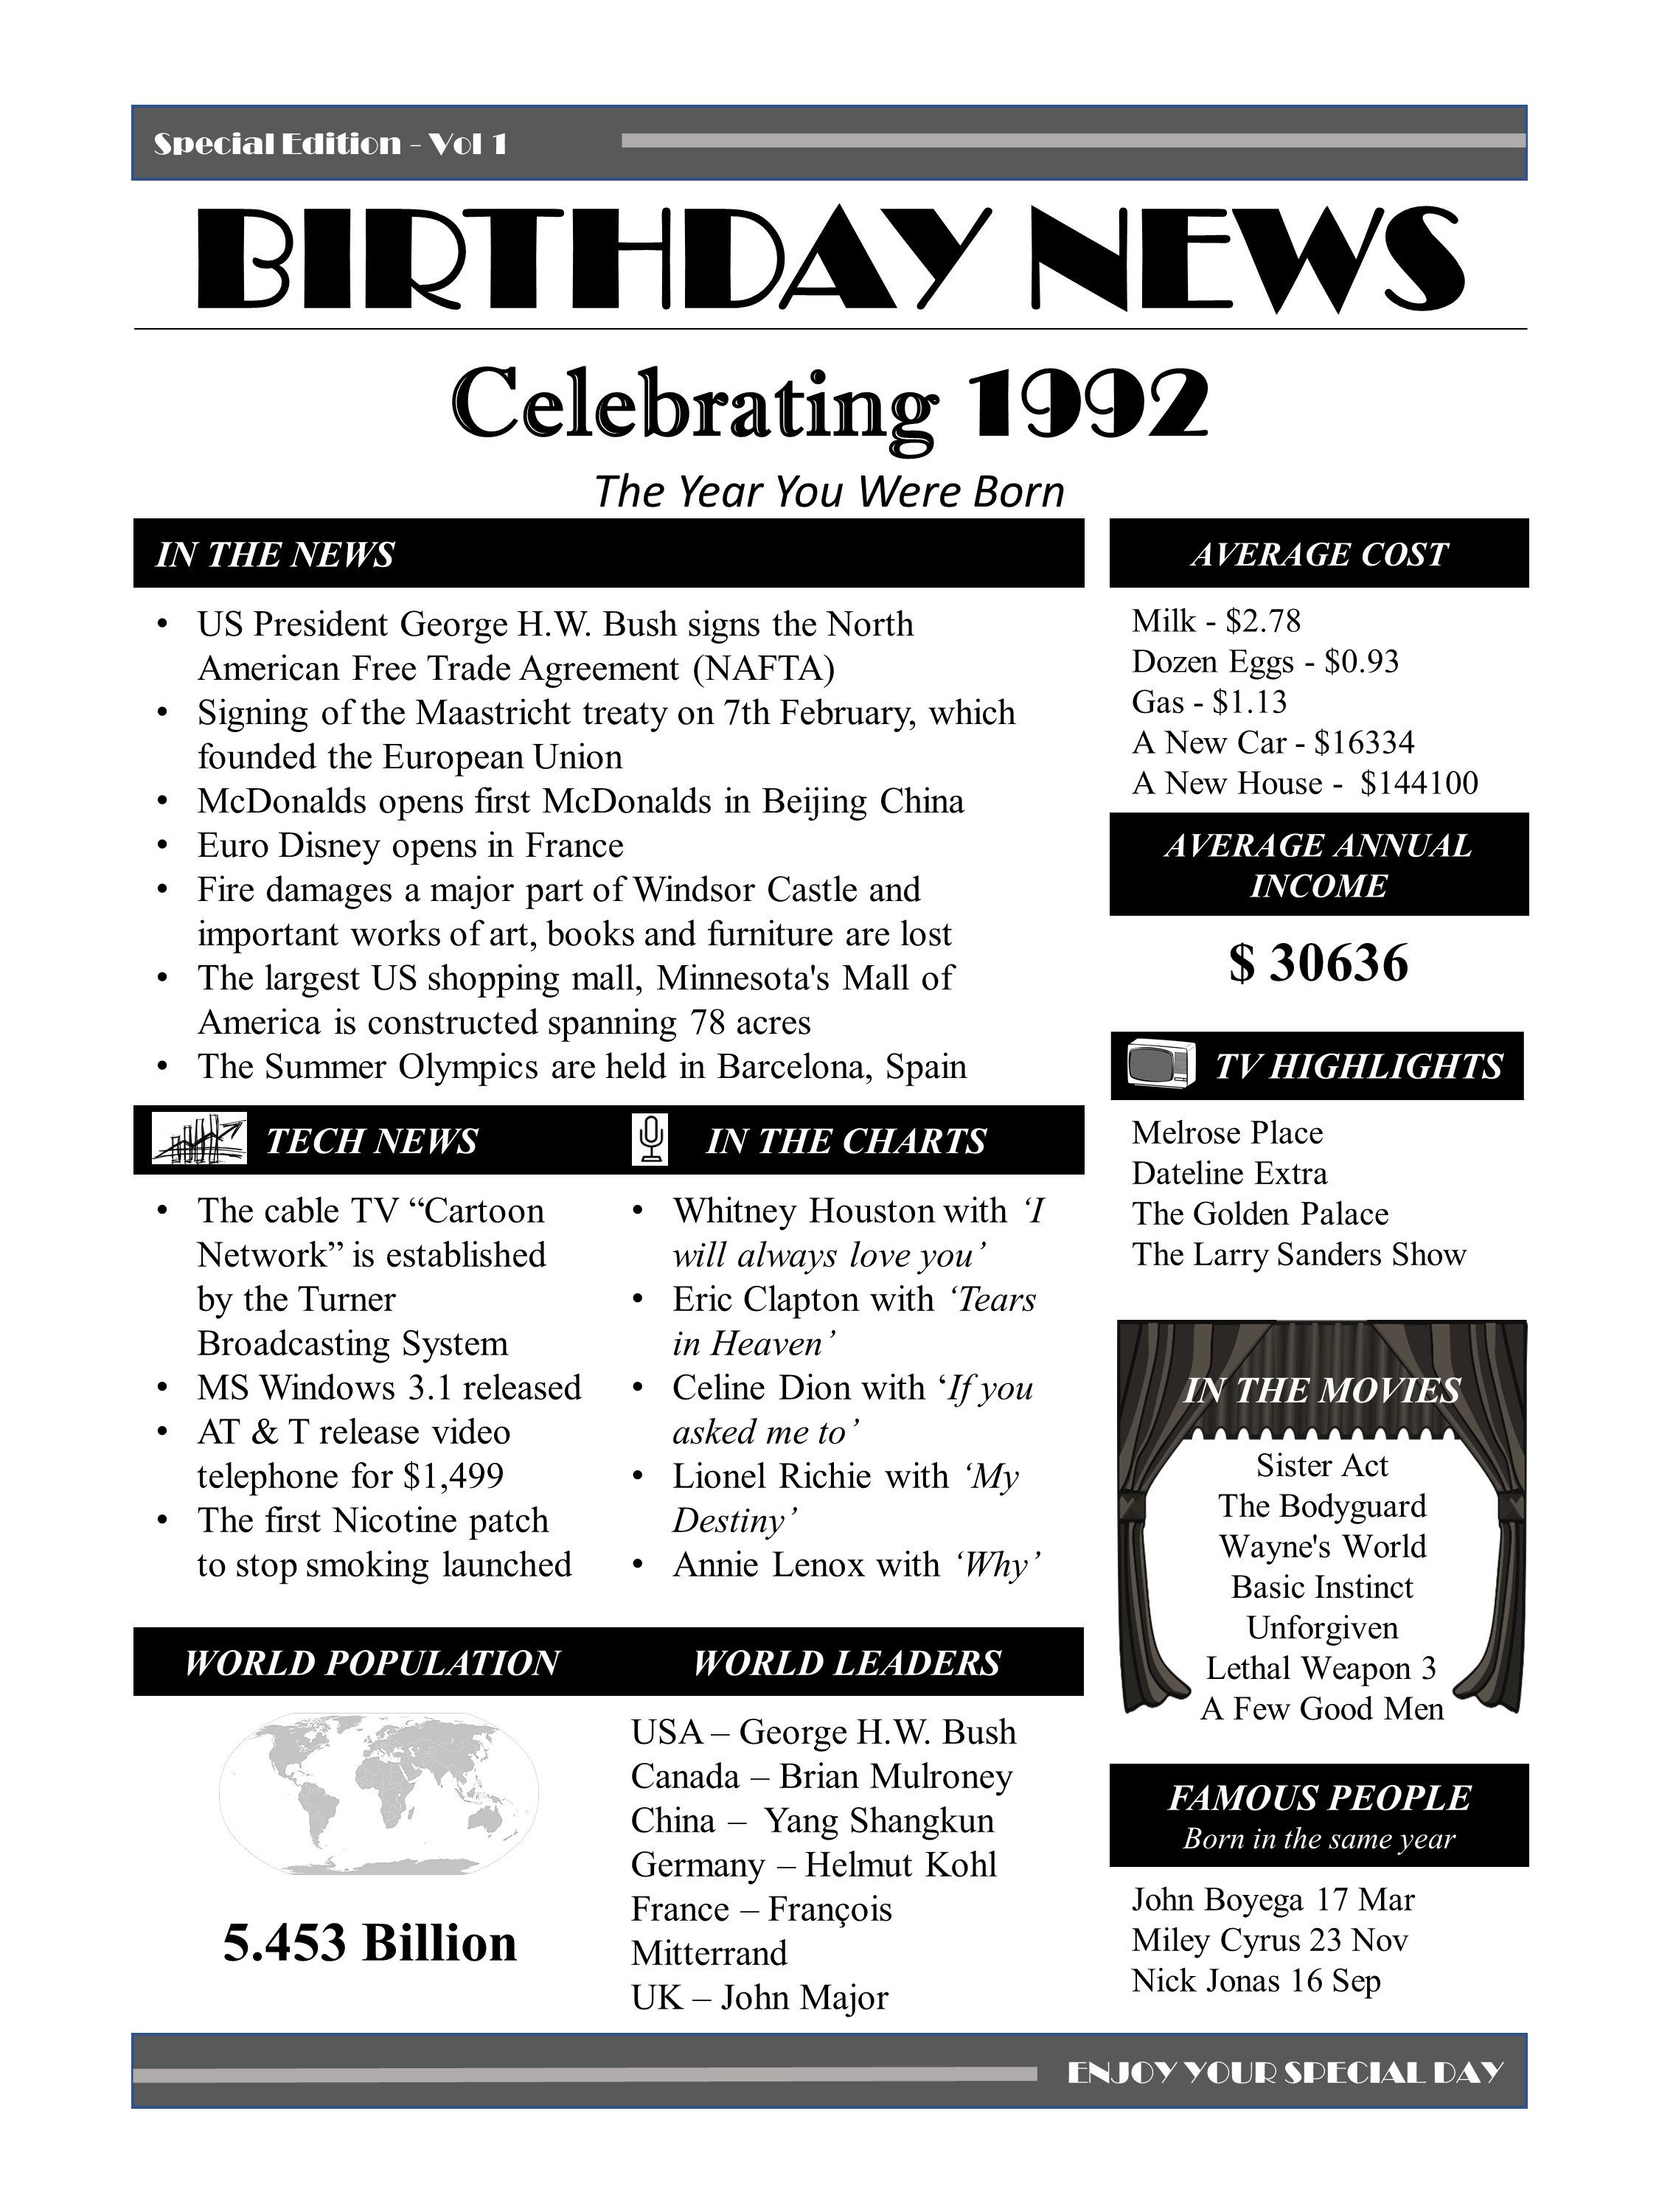 1992-birthday-news-poster-the-year-you-were-born-printable-etsy